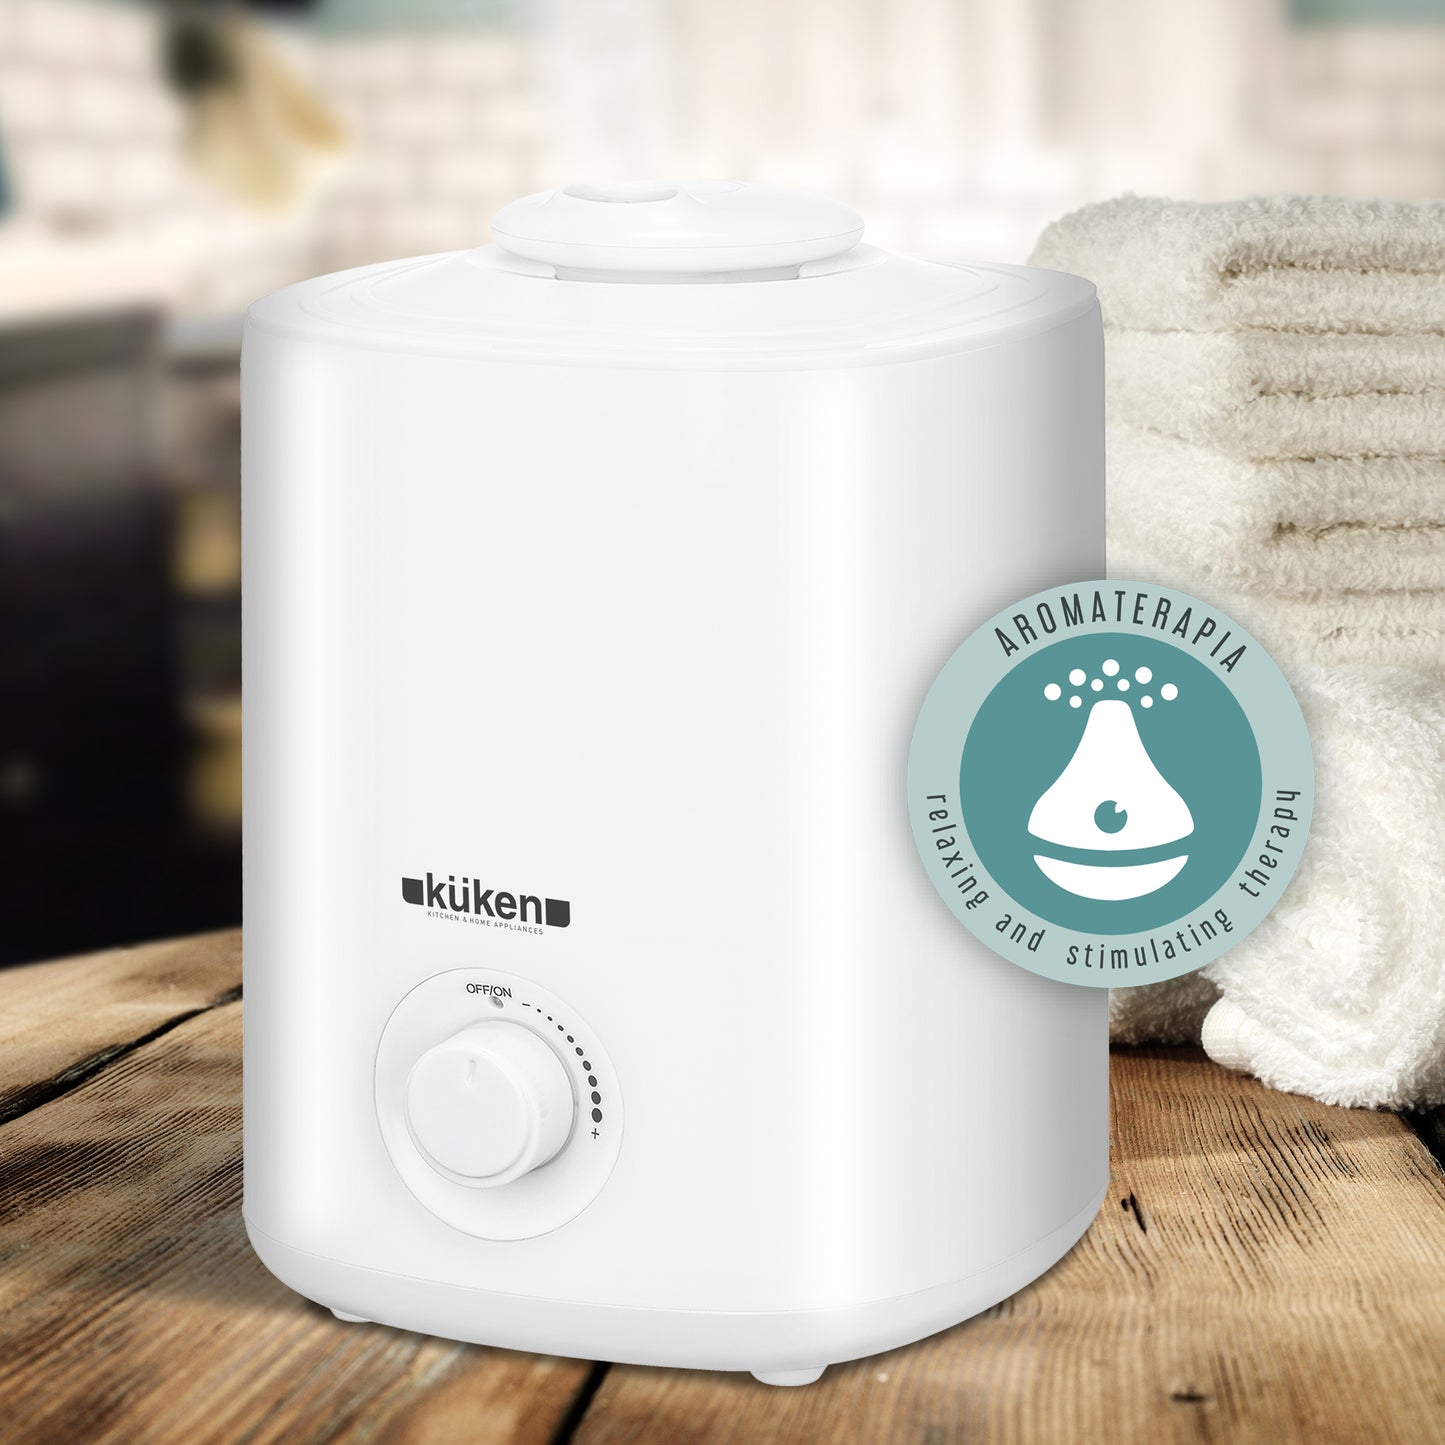 KÜKEN 20W 2.5L HUMIDIFIER AND AIR FLAVORATOR 